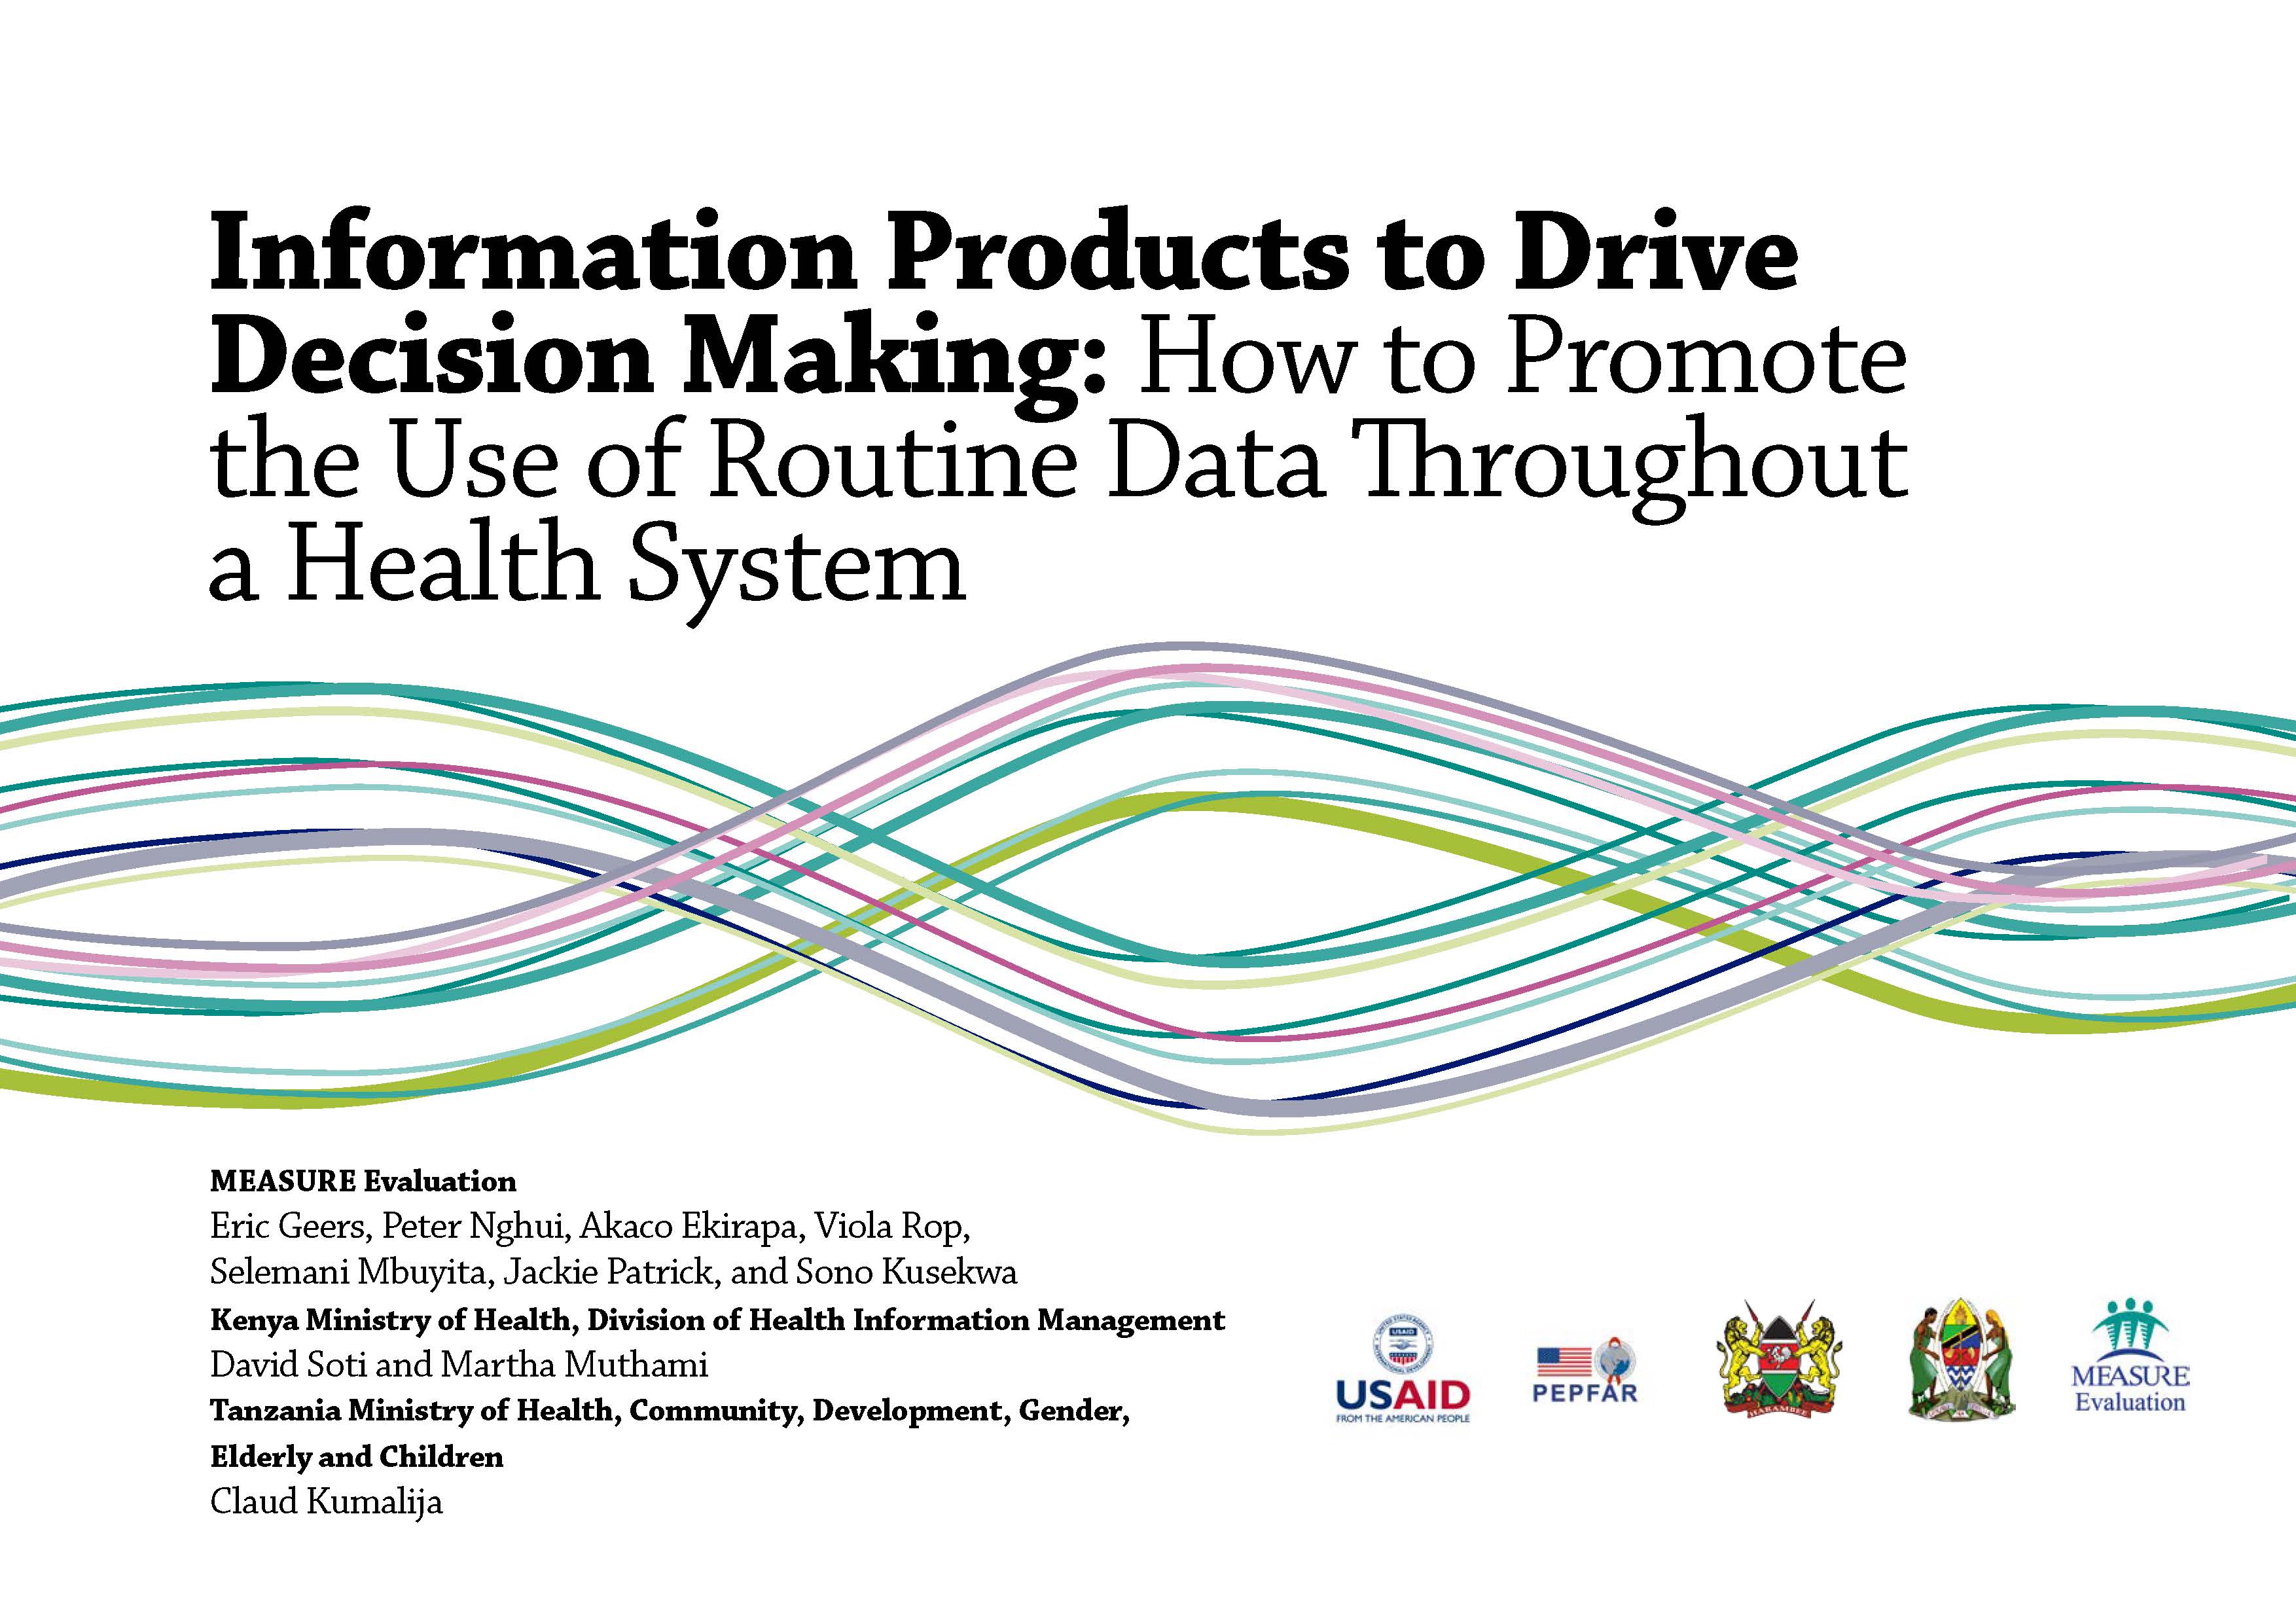 Information Products to Drive Decision Making: How to Promote the Use of Routine Data Throughout a Health System